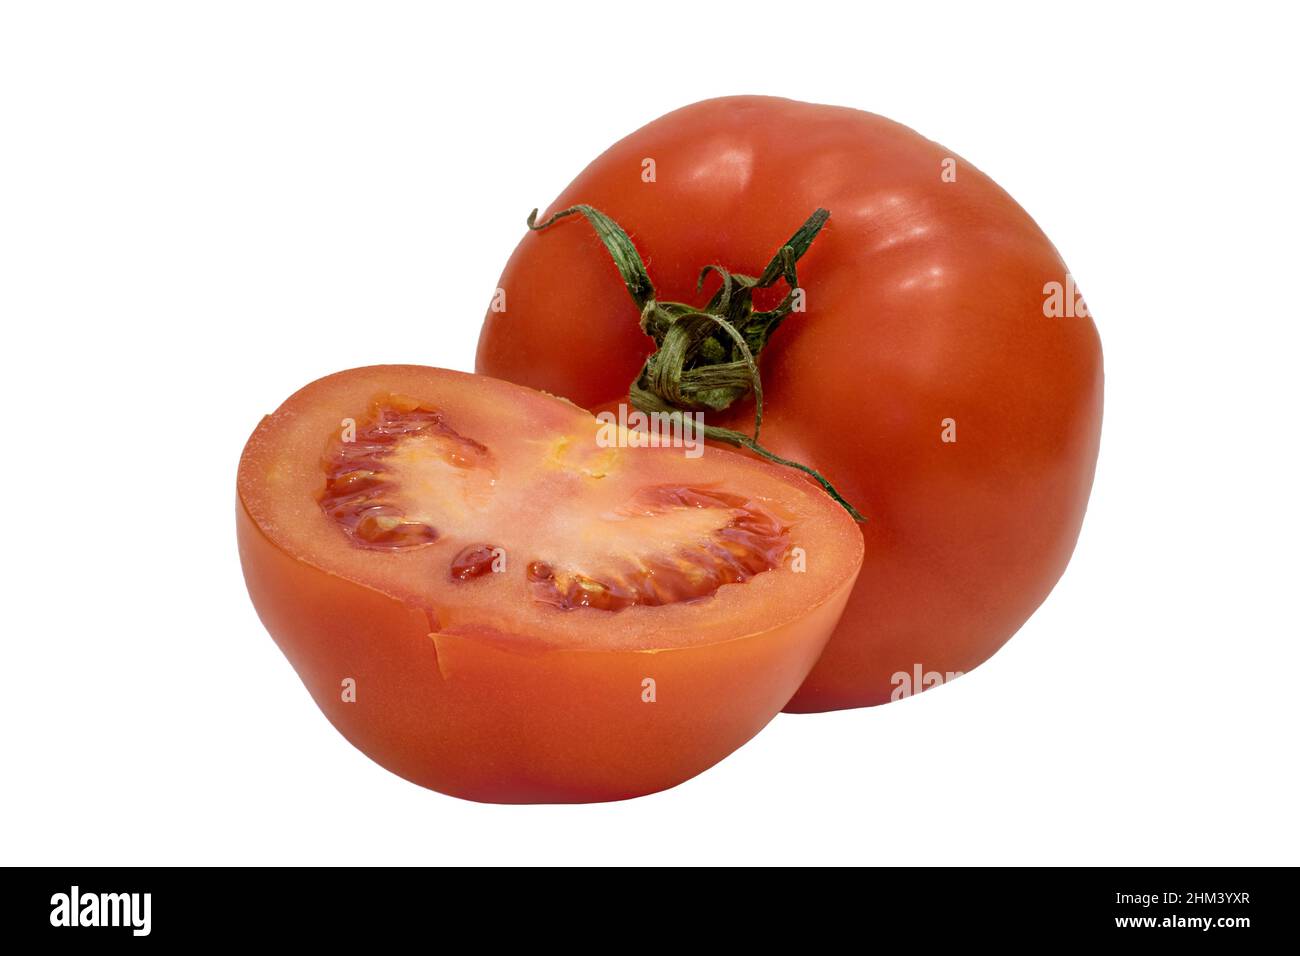 Image of ripe vegetables whole and half red tomato Stock Photo